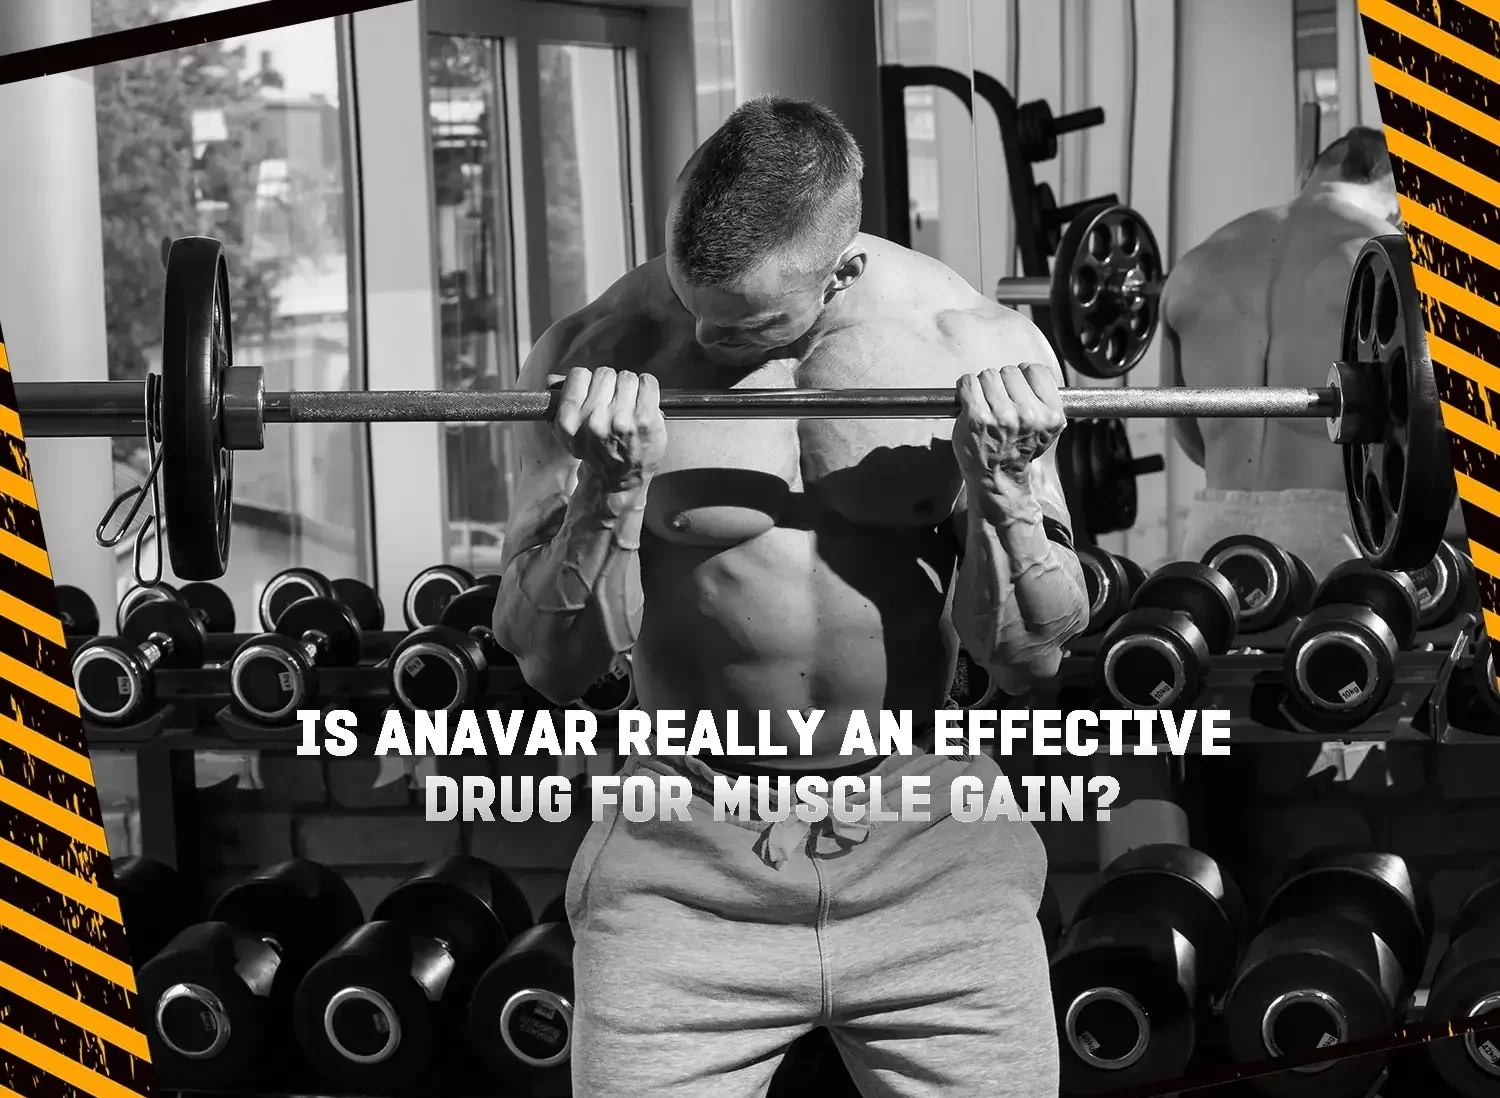 Is Anavar really effective